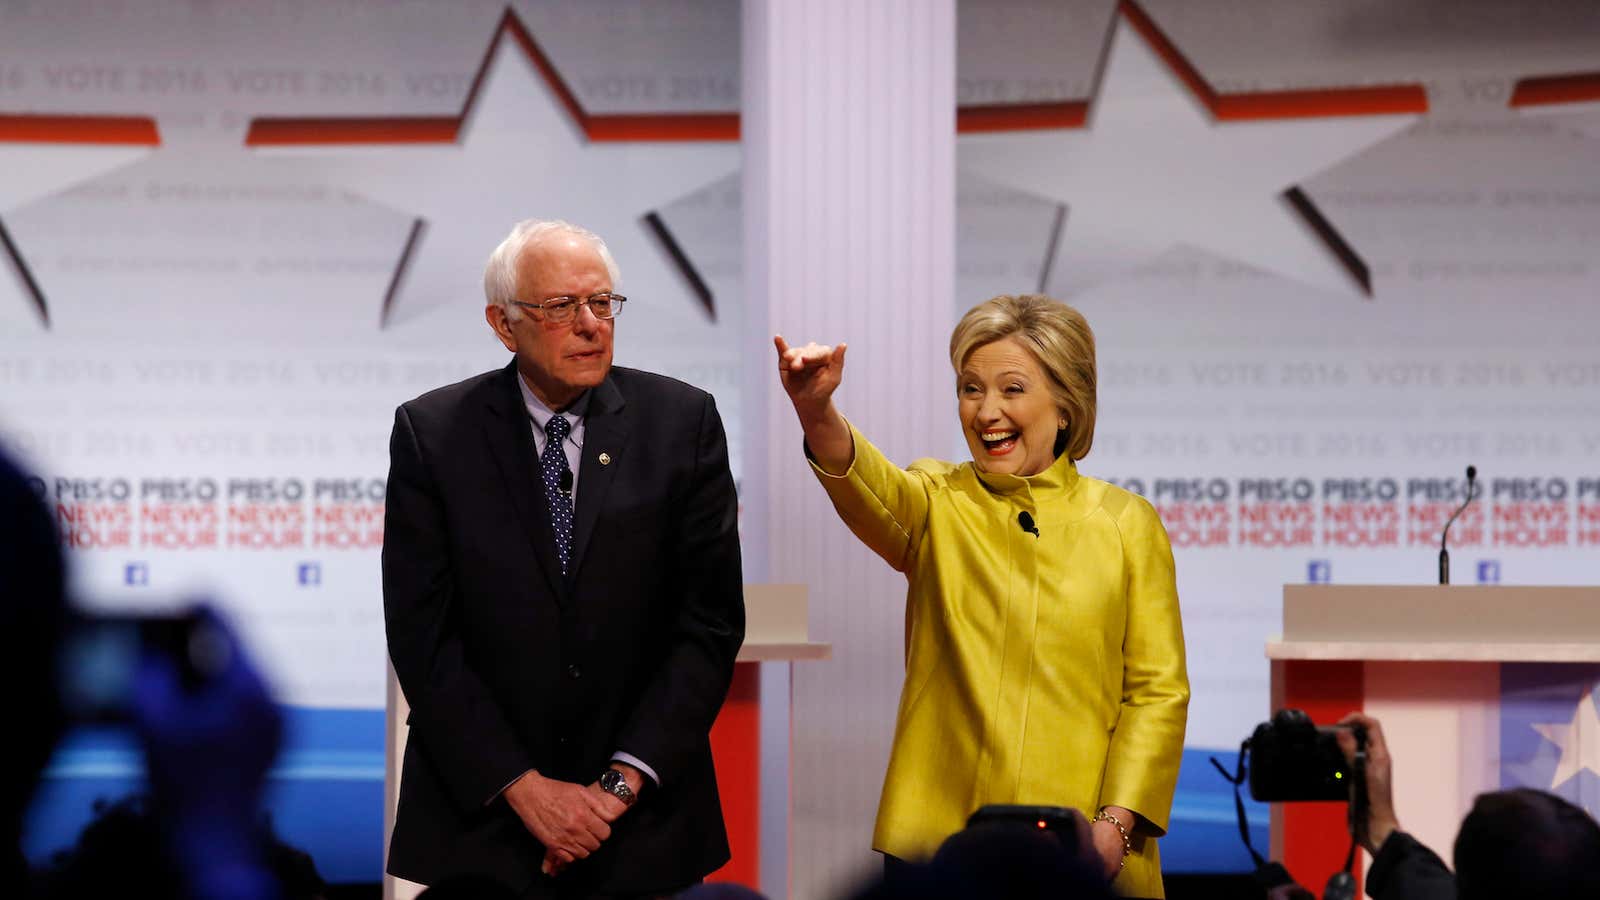 Both Democratic candidates have to prove they understand the intersection between race and class in the US.